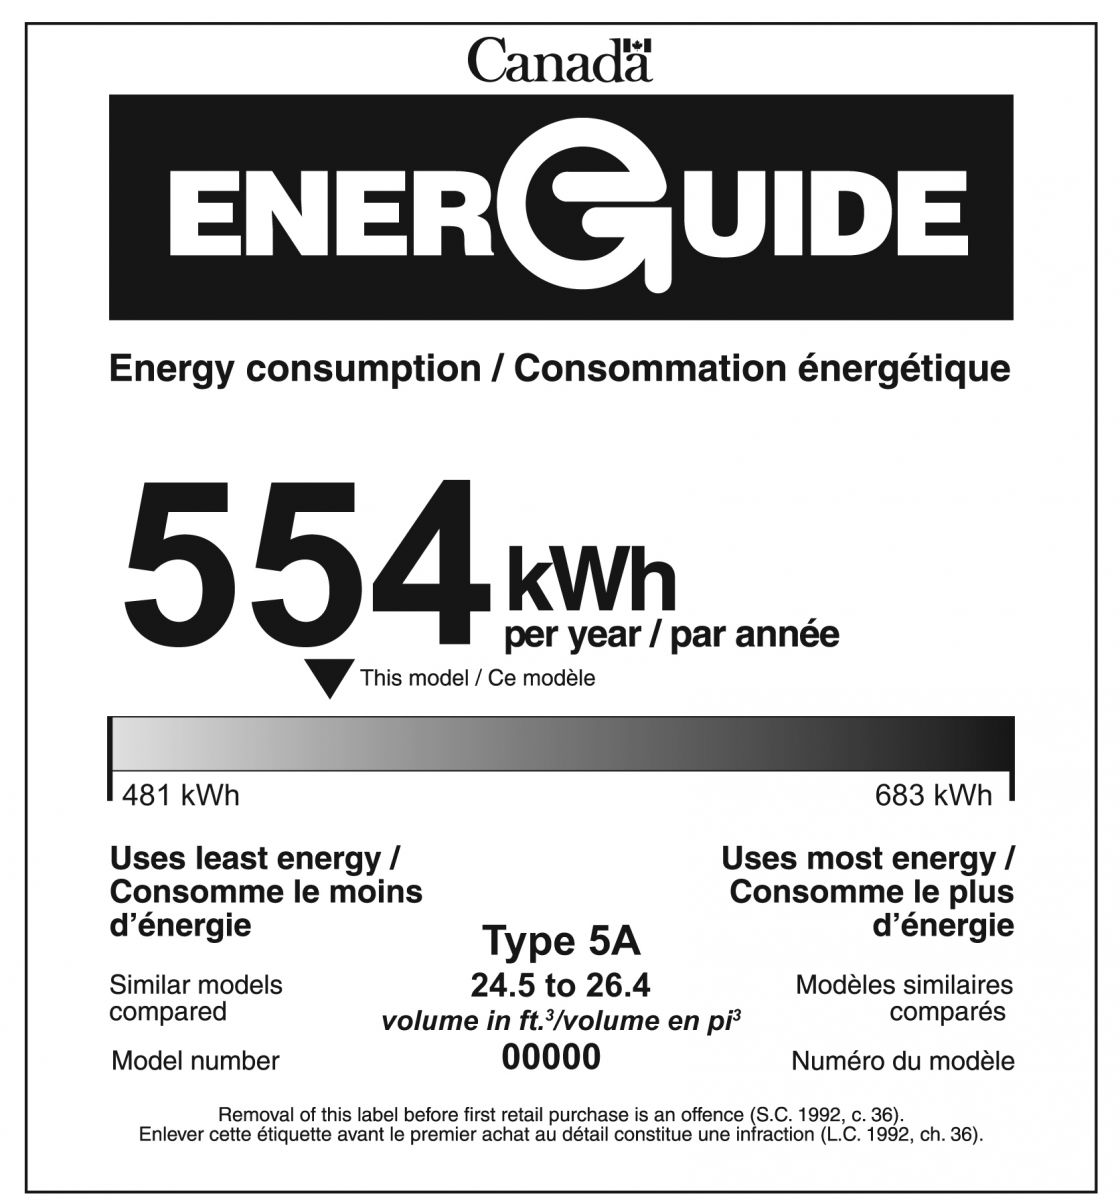 government of canada energuide energy consumption